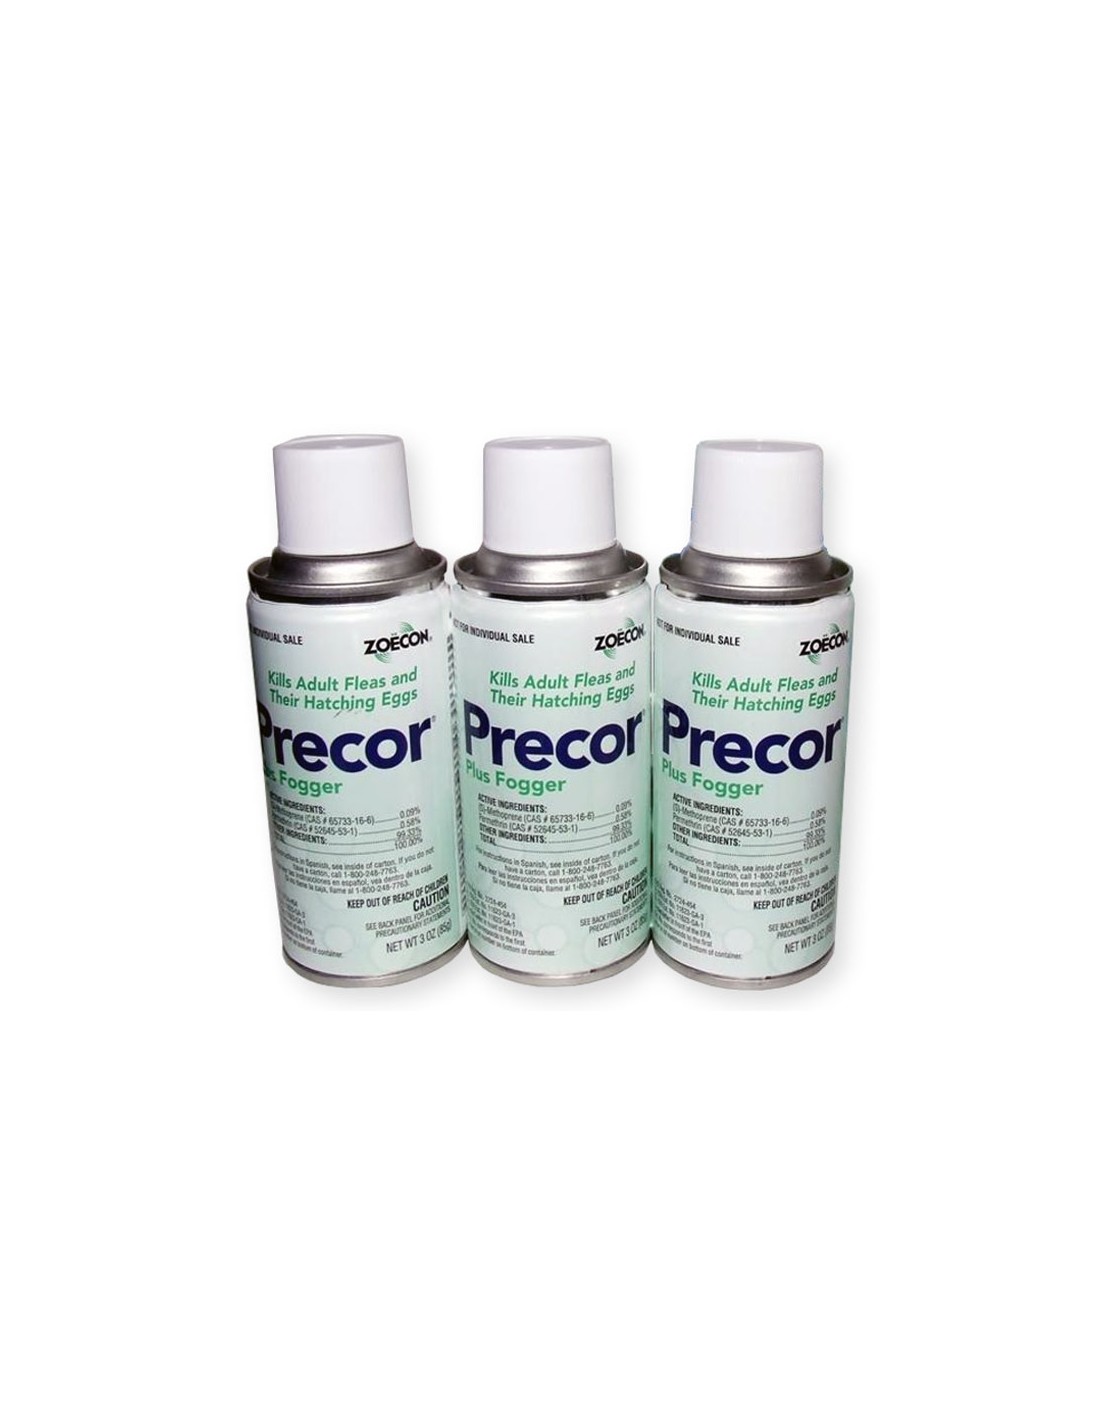 Precor Plus Fogger 3 Pack Questions & Answers